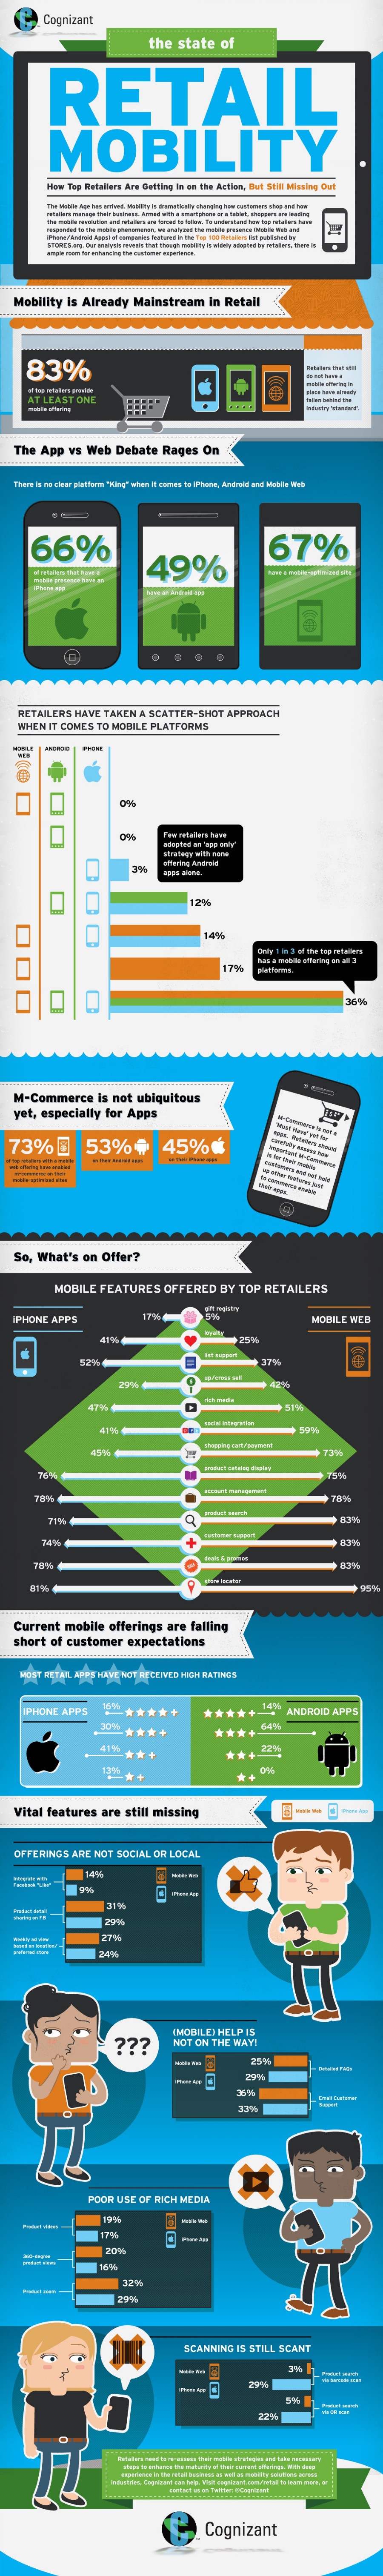 The state of retail mobility